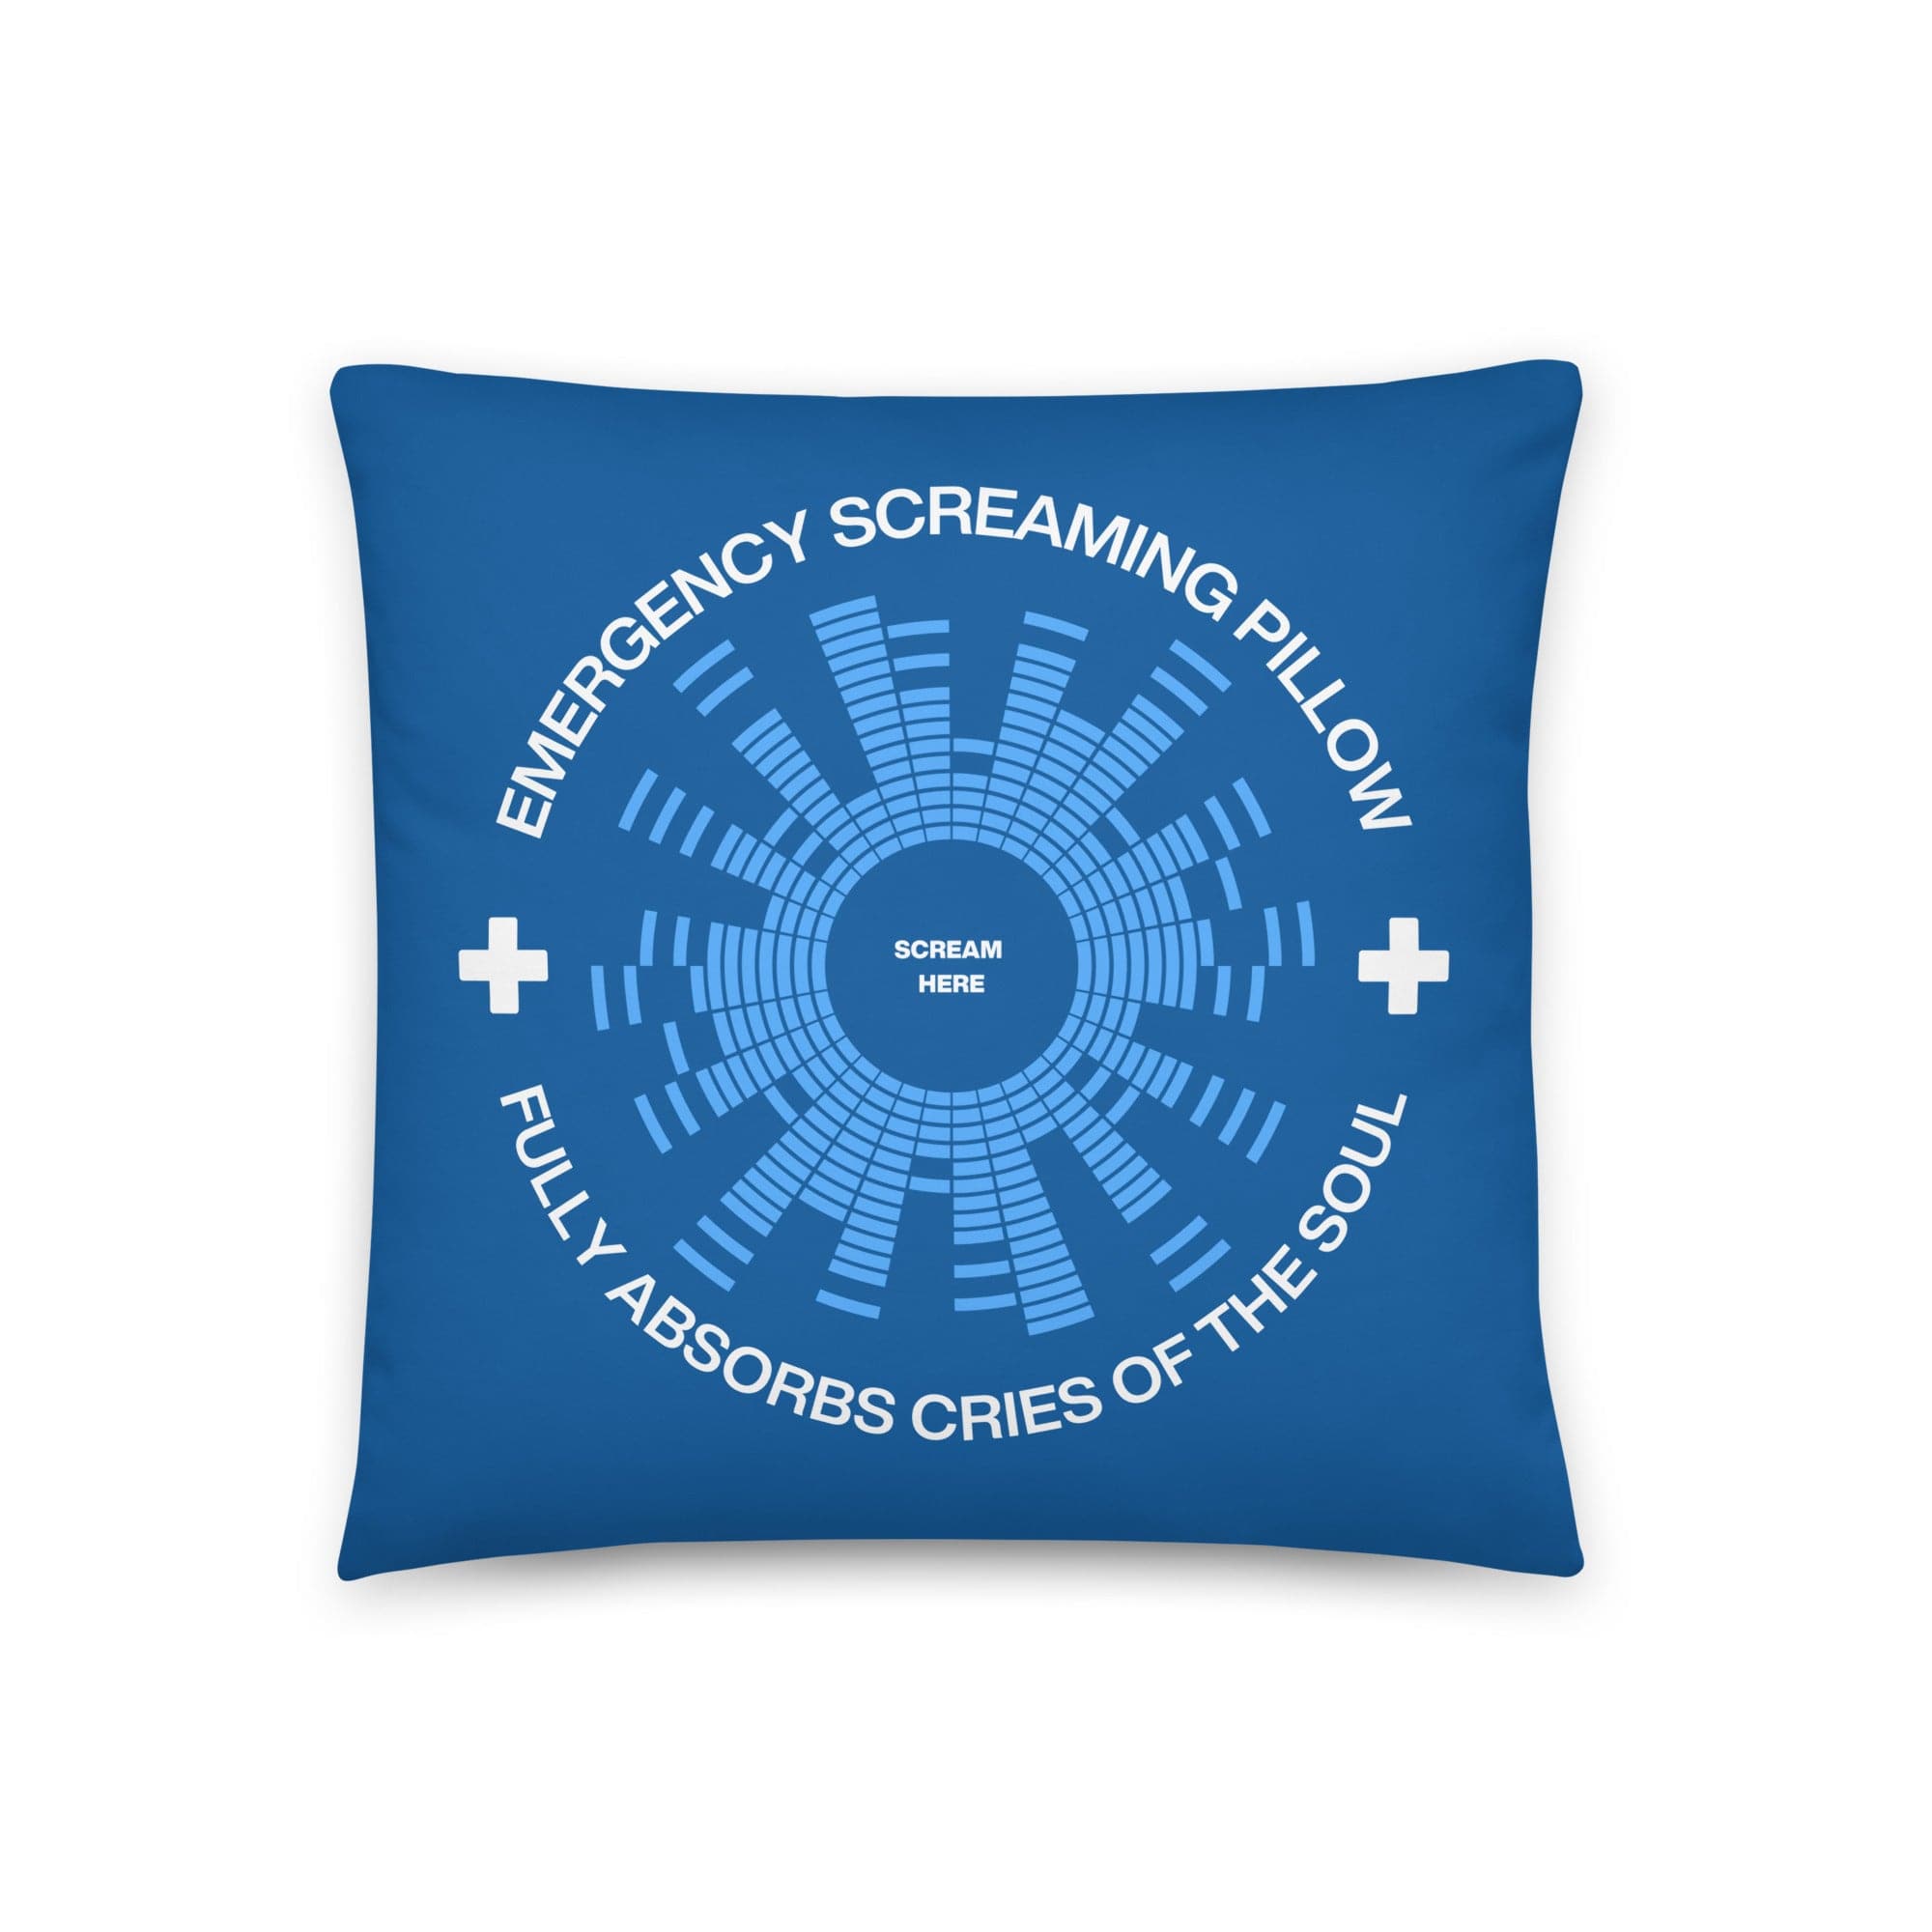 Emergency Screaming Pillow in Royally Screwed Blue Pillow Jolly & Goode